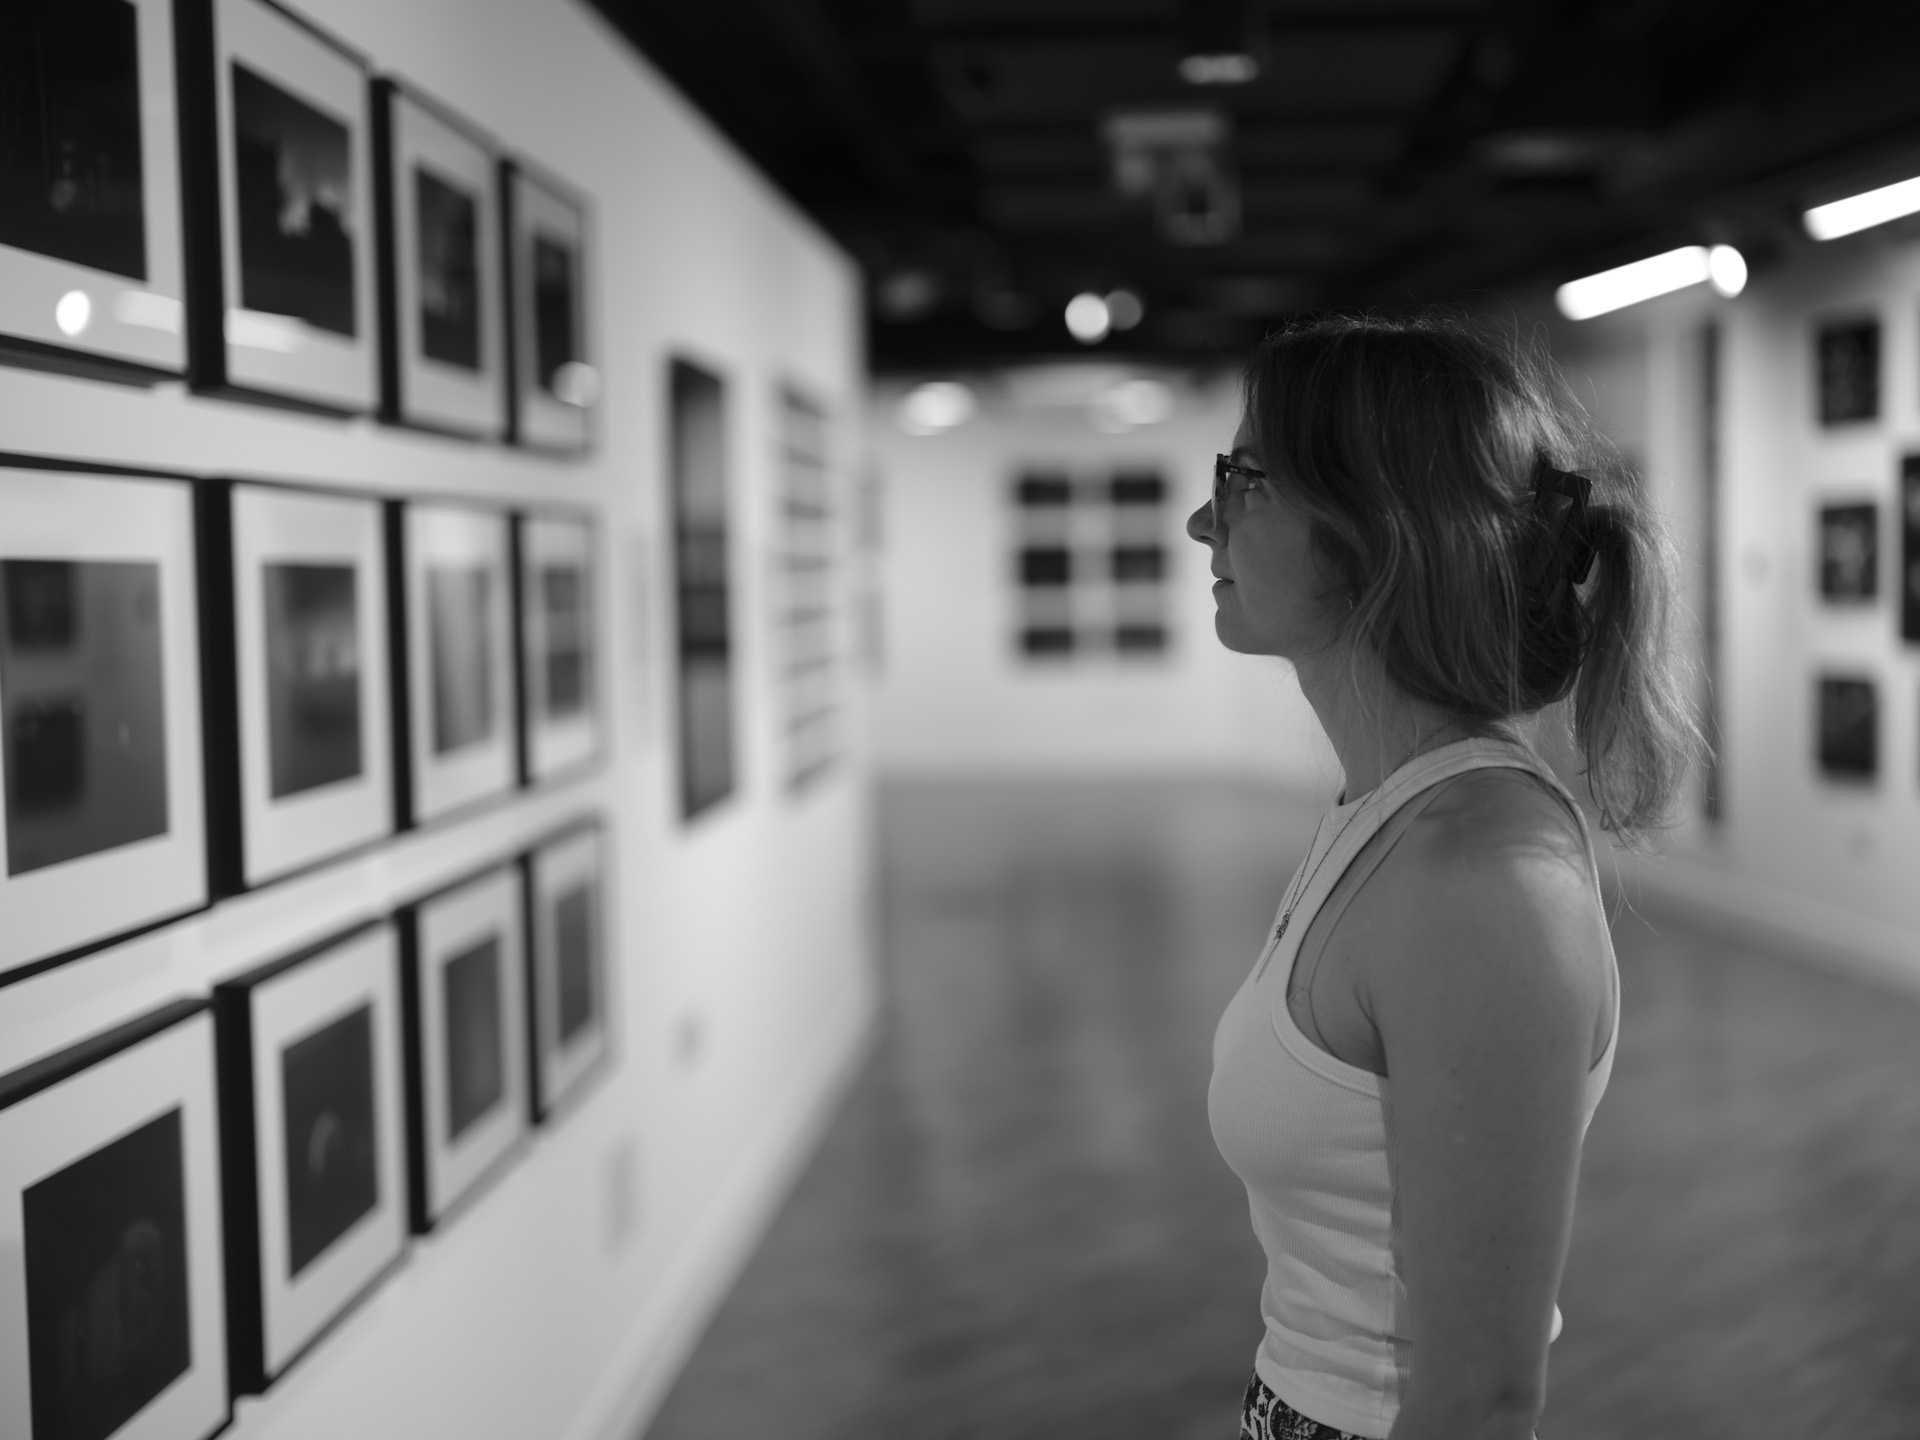 Lady in an art gallery, photo using the Fujifilm GFX100 II and GF 55mm F1.7 lens